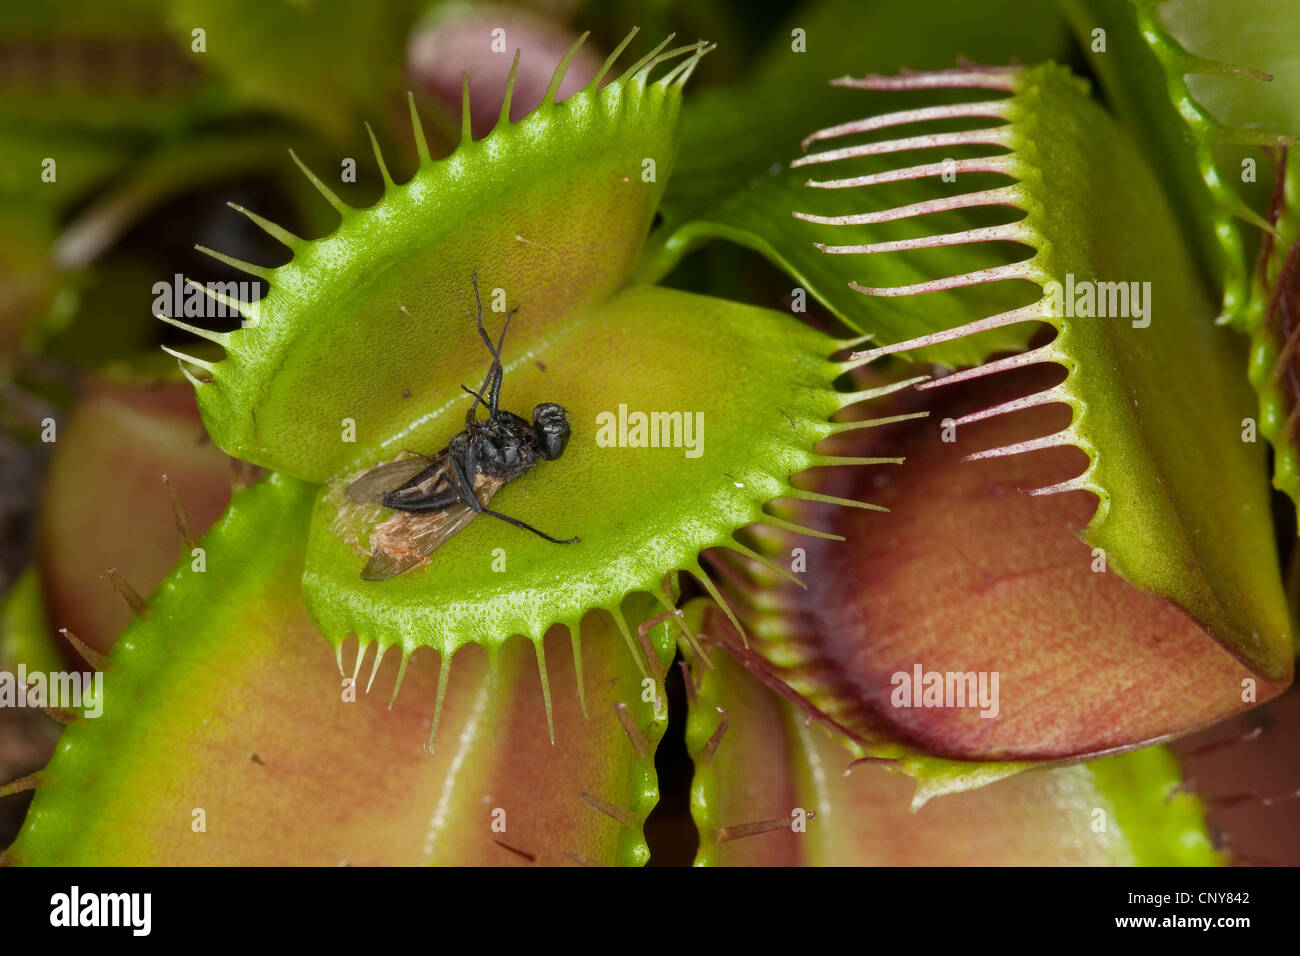 Venus Flytrap, Venus's Flytrap, Venus' Flytrap, Venus Fly Trap, Venus's Fly Trap, Venus' Fly Trap, Fly-Trap (Dionaea muscipula), open leaf trap with remains of a digested fly Stock Photo